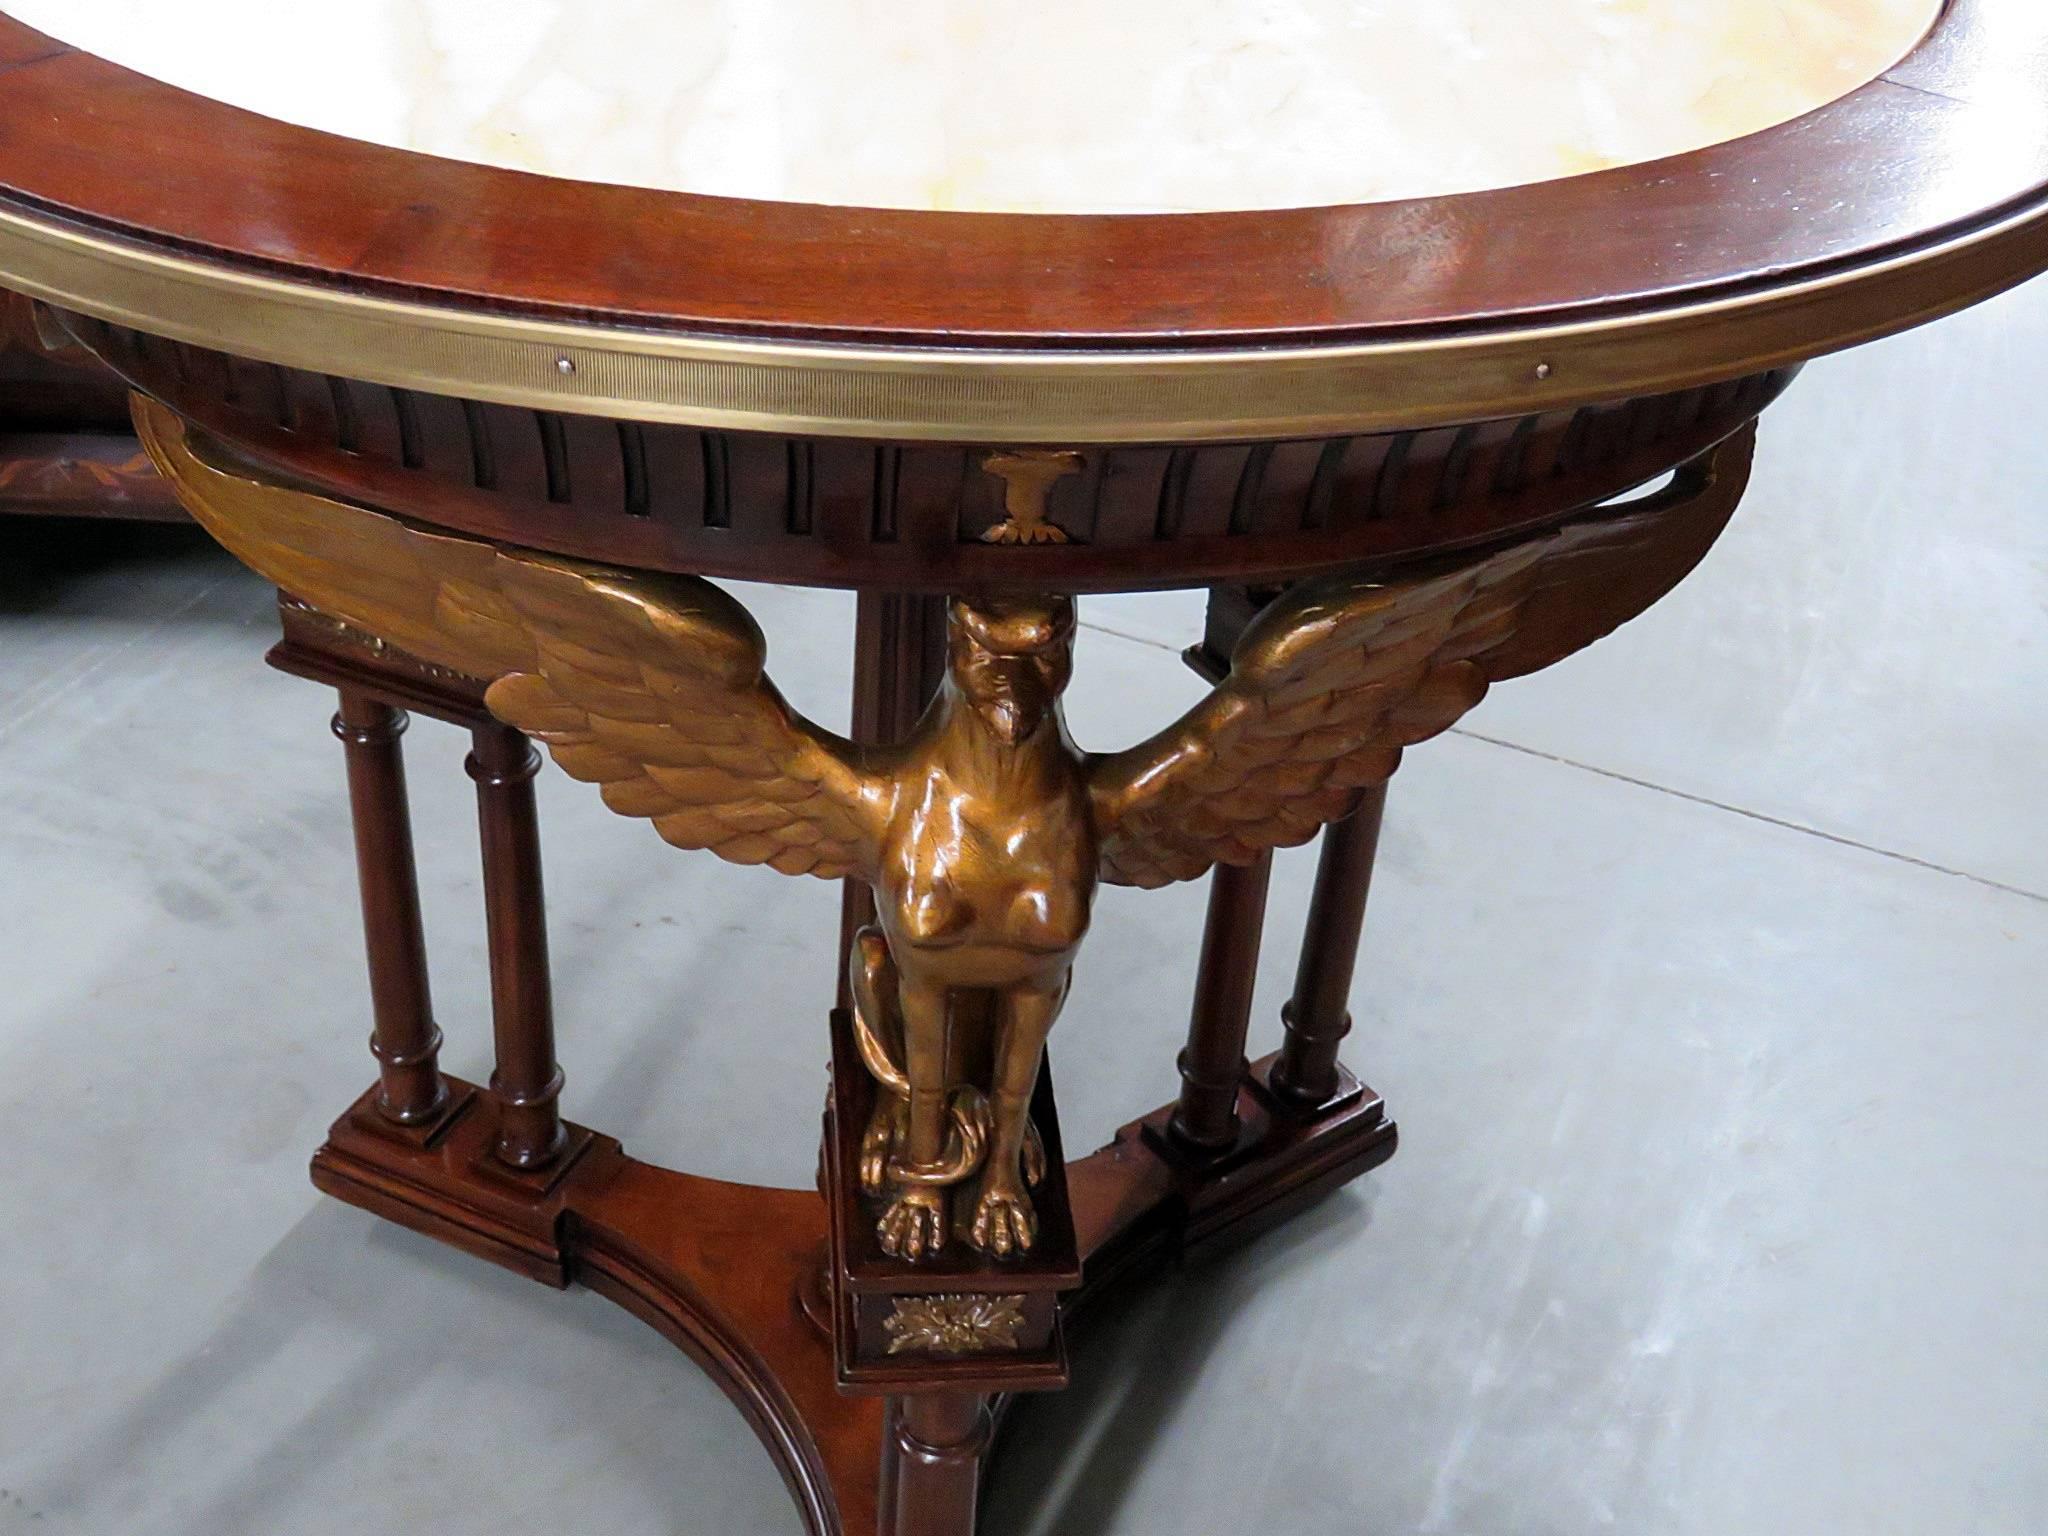 Carved Russian Empire Style Marble Top Center Table with Gilded Griffins